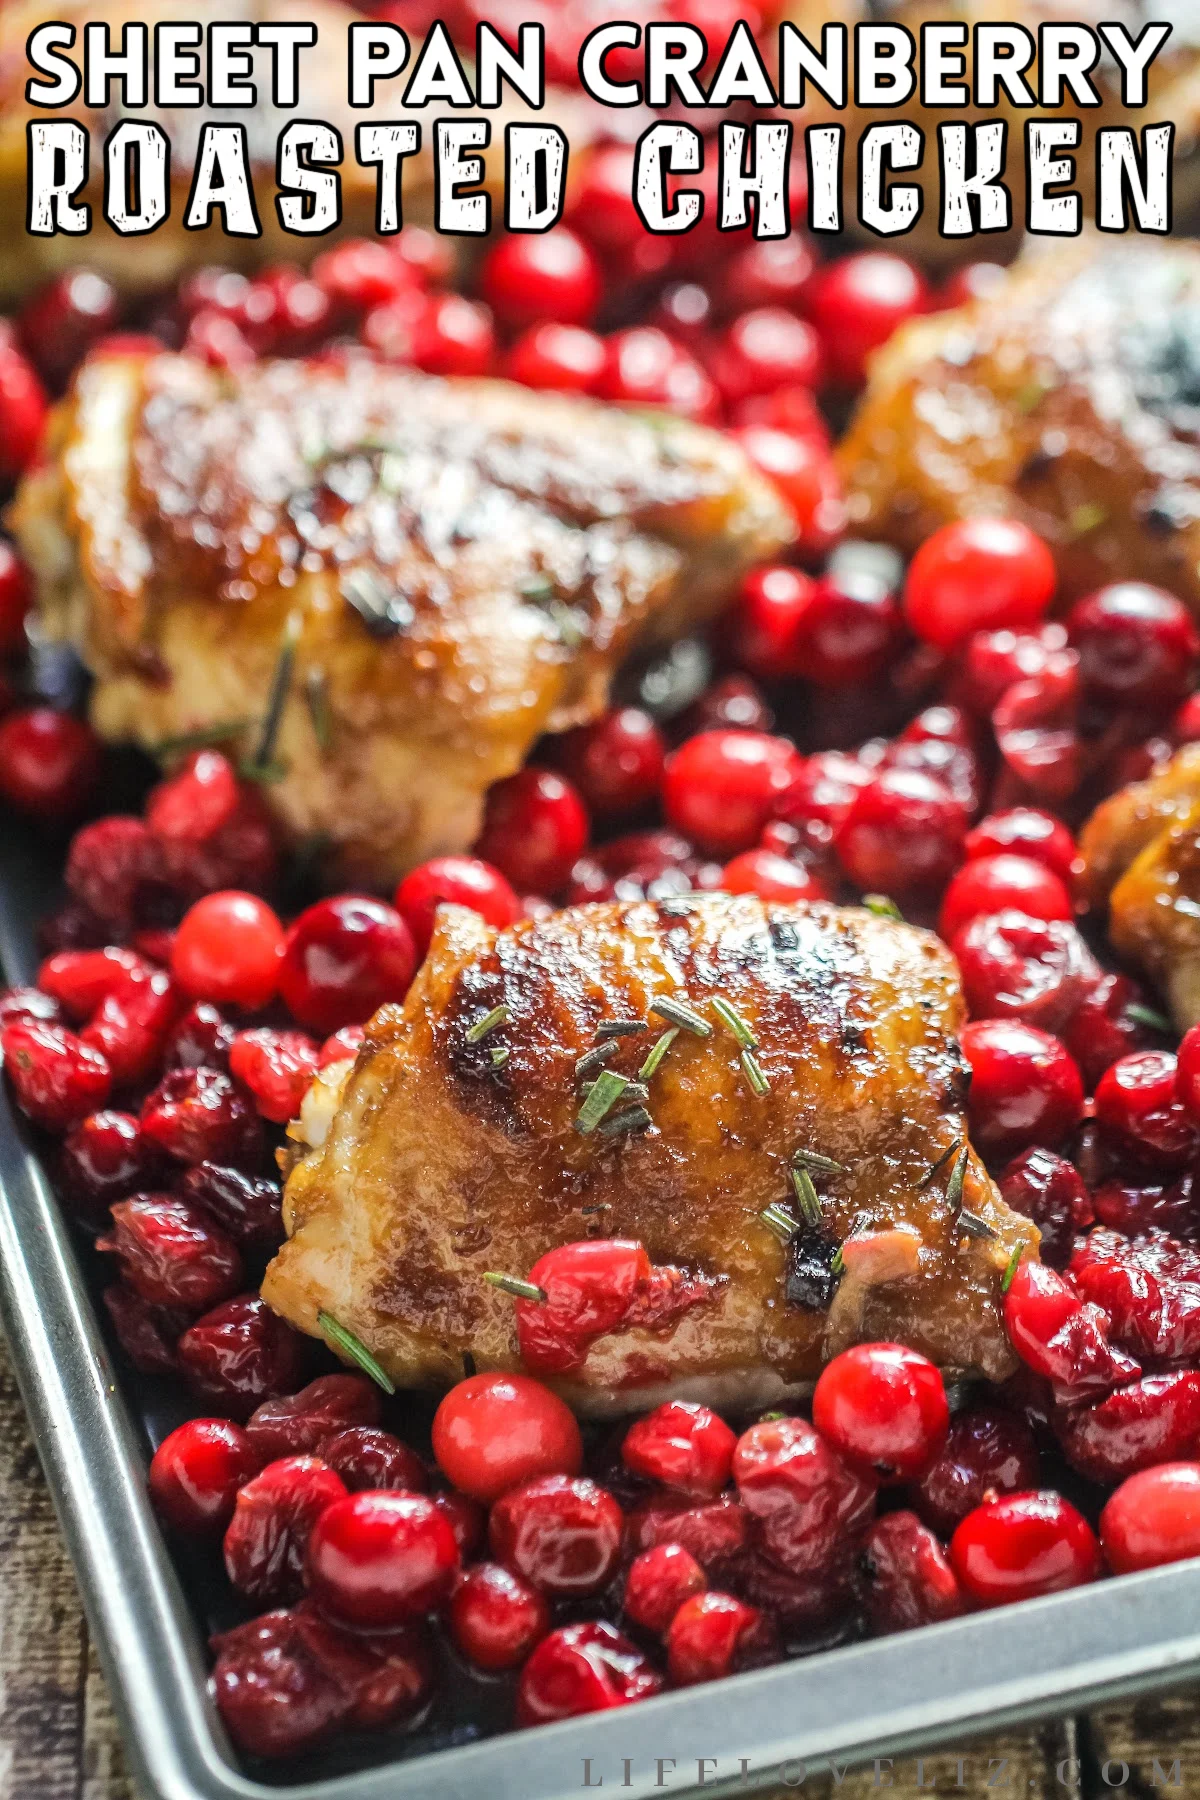 Forget about a boring night of the usual. Make your dinner more festive with this easy recipe for sheet pan cranberry roasted chicken!